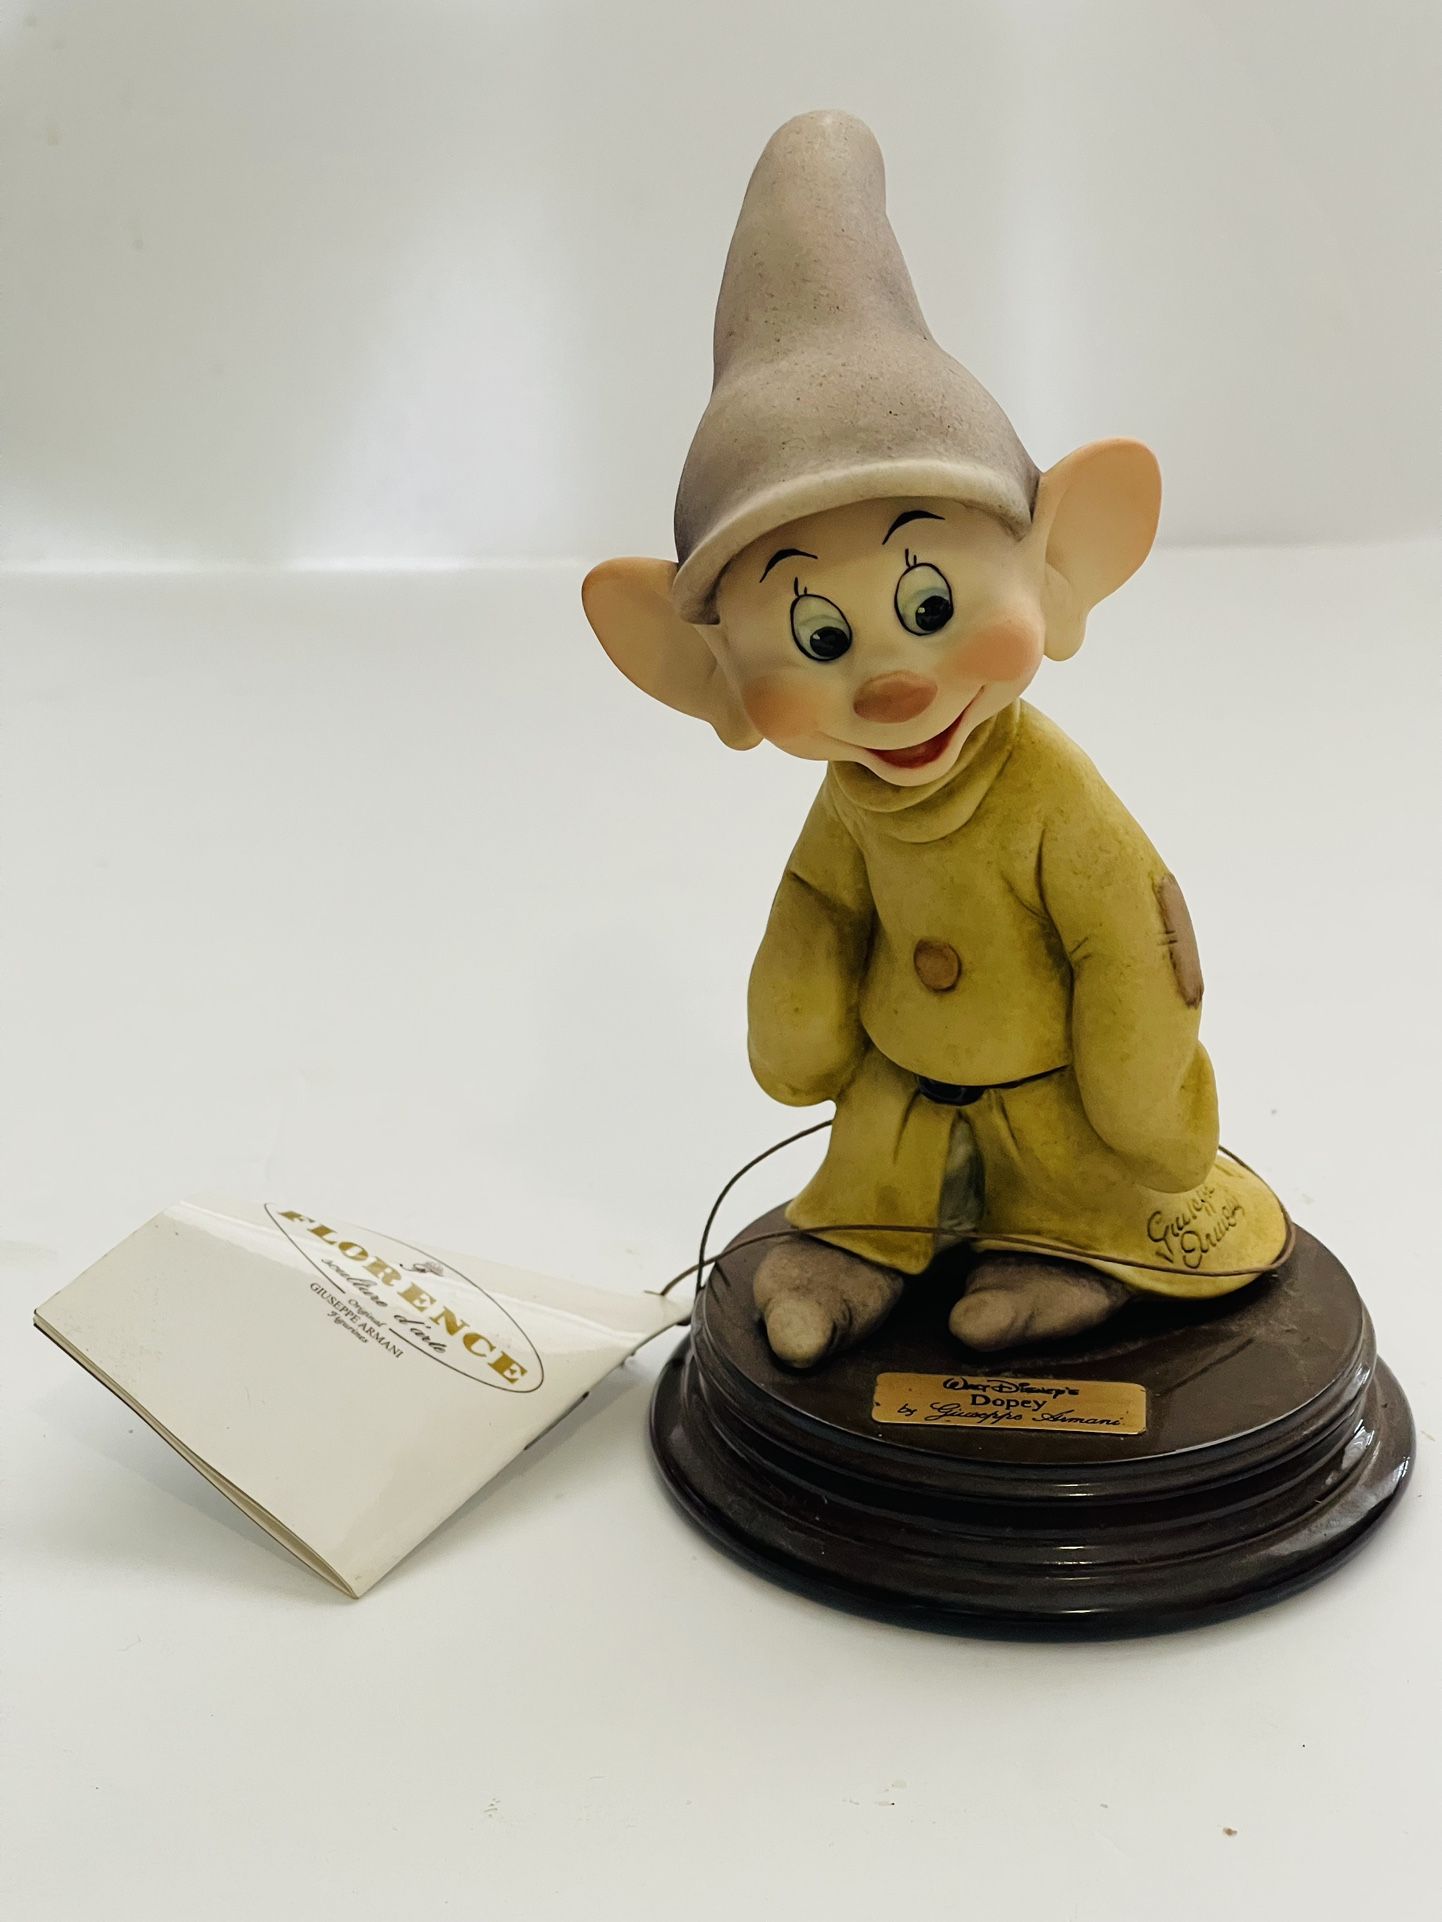 SIGNED Florence Guiseppe Armani Walt Disney's Snow White and The Seven Dwarfs “Dopey” Figurine 